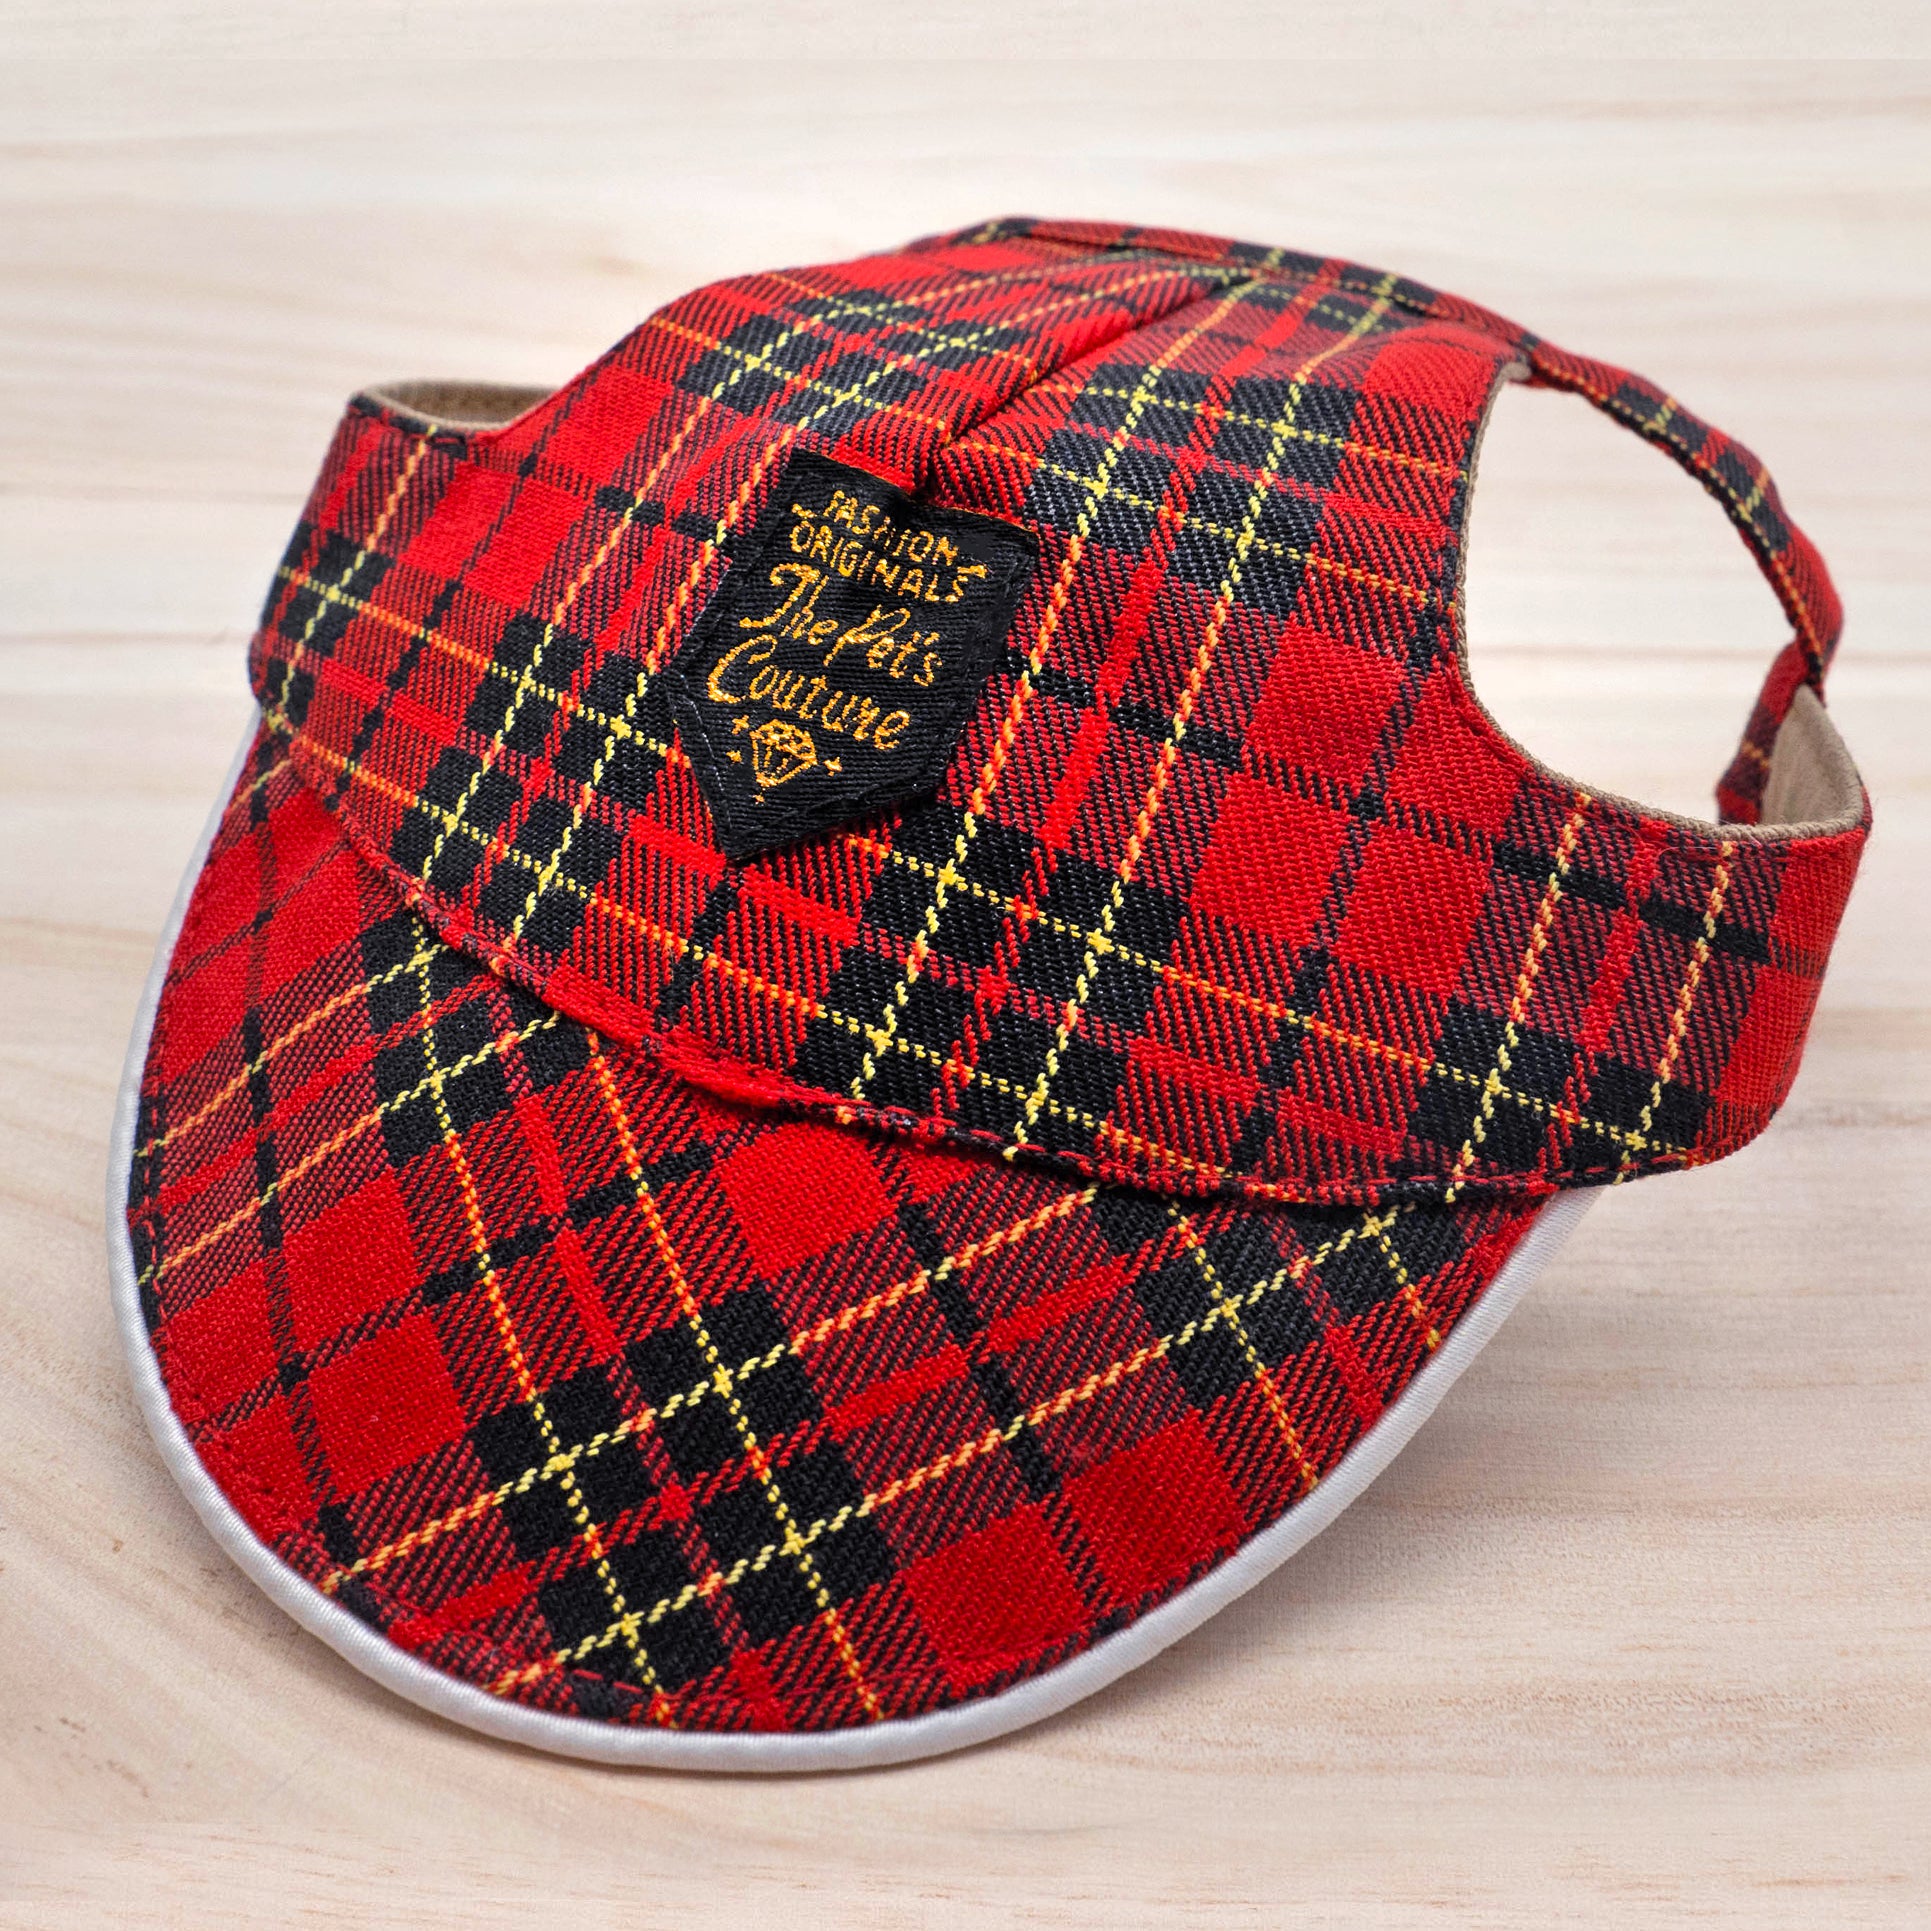 Walking Caps For Him - Red Blazer - The Pet's Couture